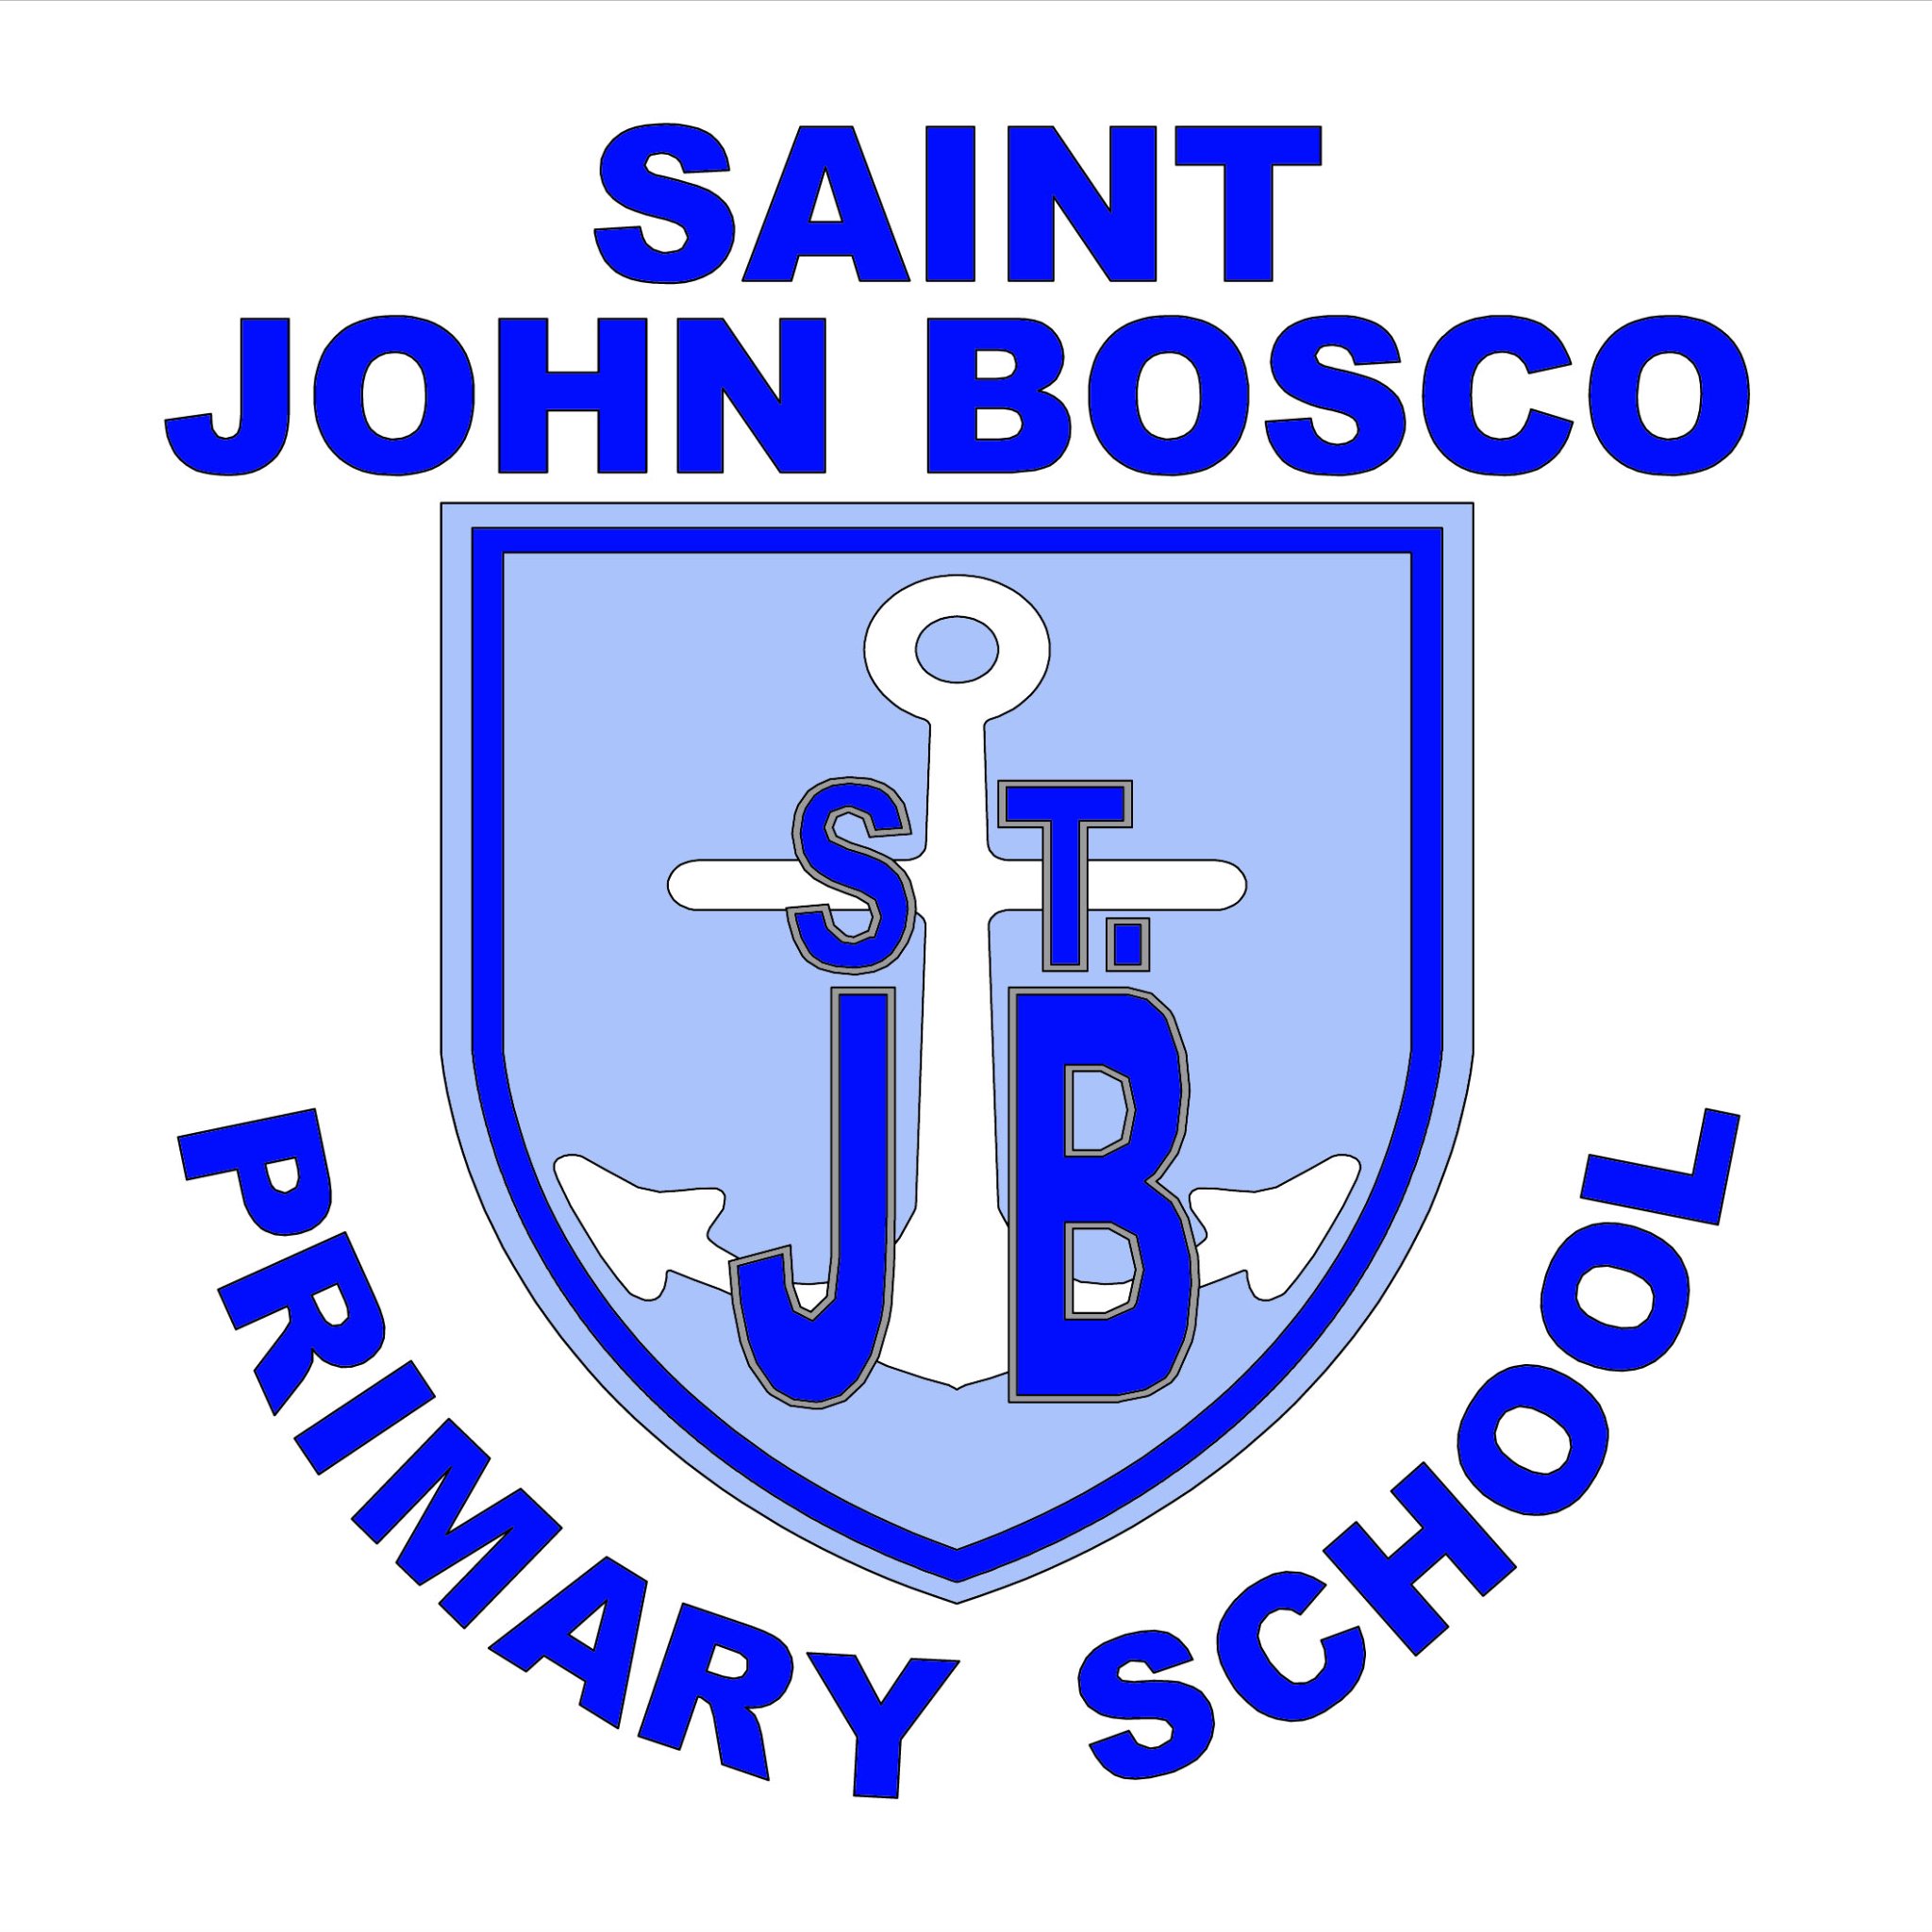 The official Twitter page of St. John Bosco Primary School, Erskine.

💙 Kindness, Compassion, Inclusion, Support 💙